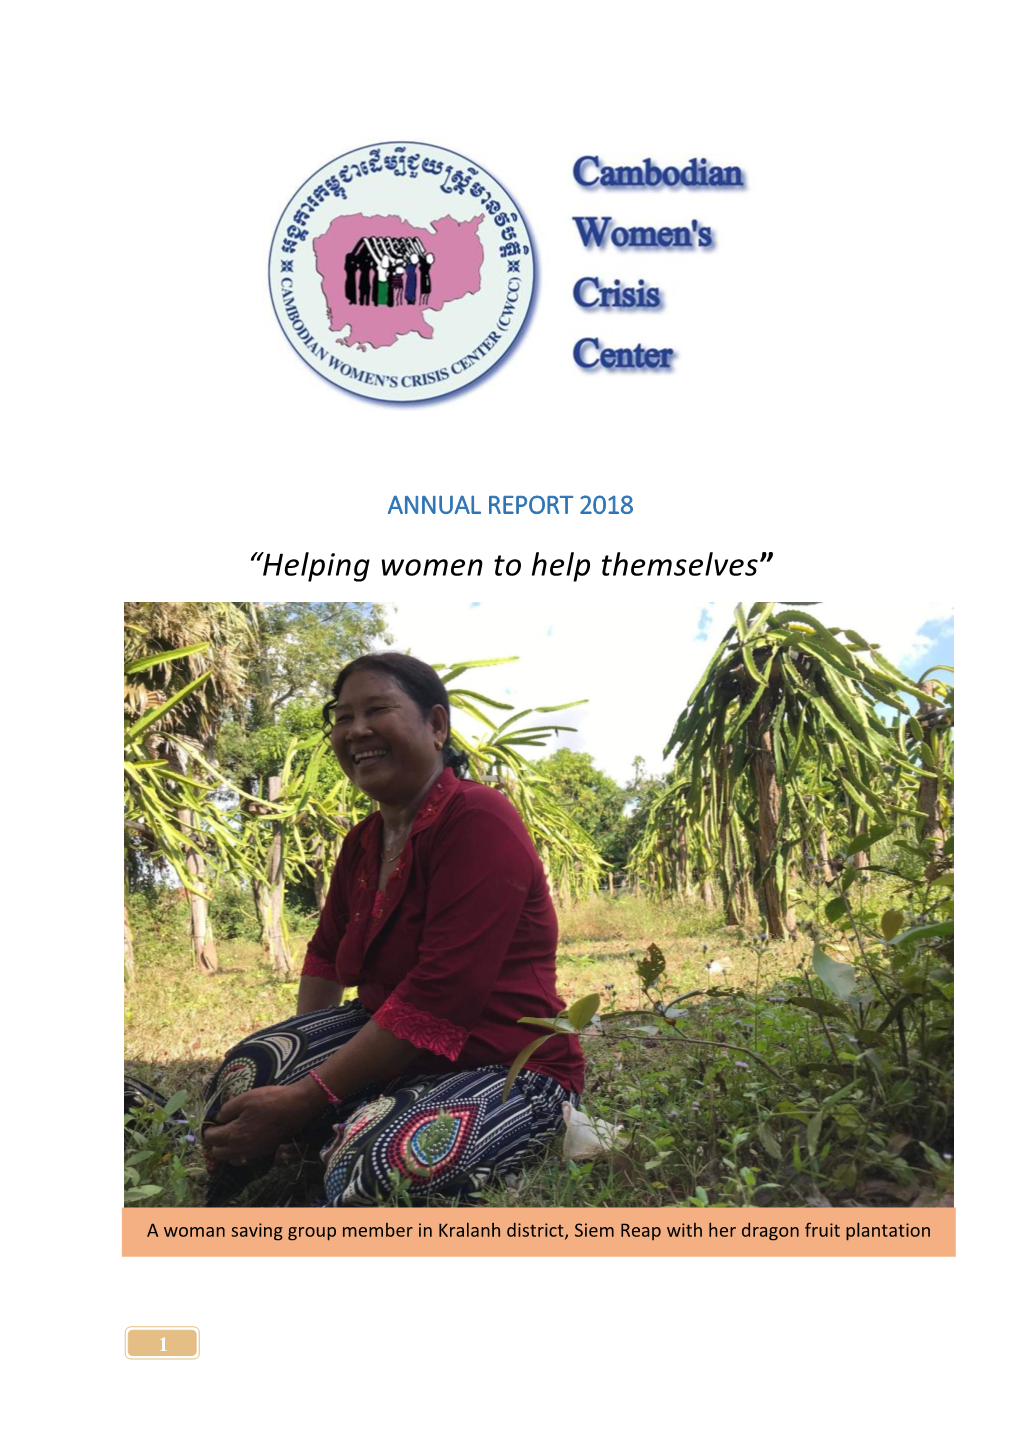 ANNUAL REPORT 2018 “Helping Women to Help Themselves”